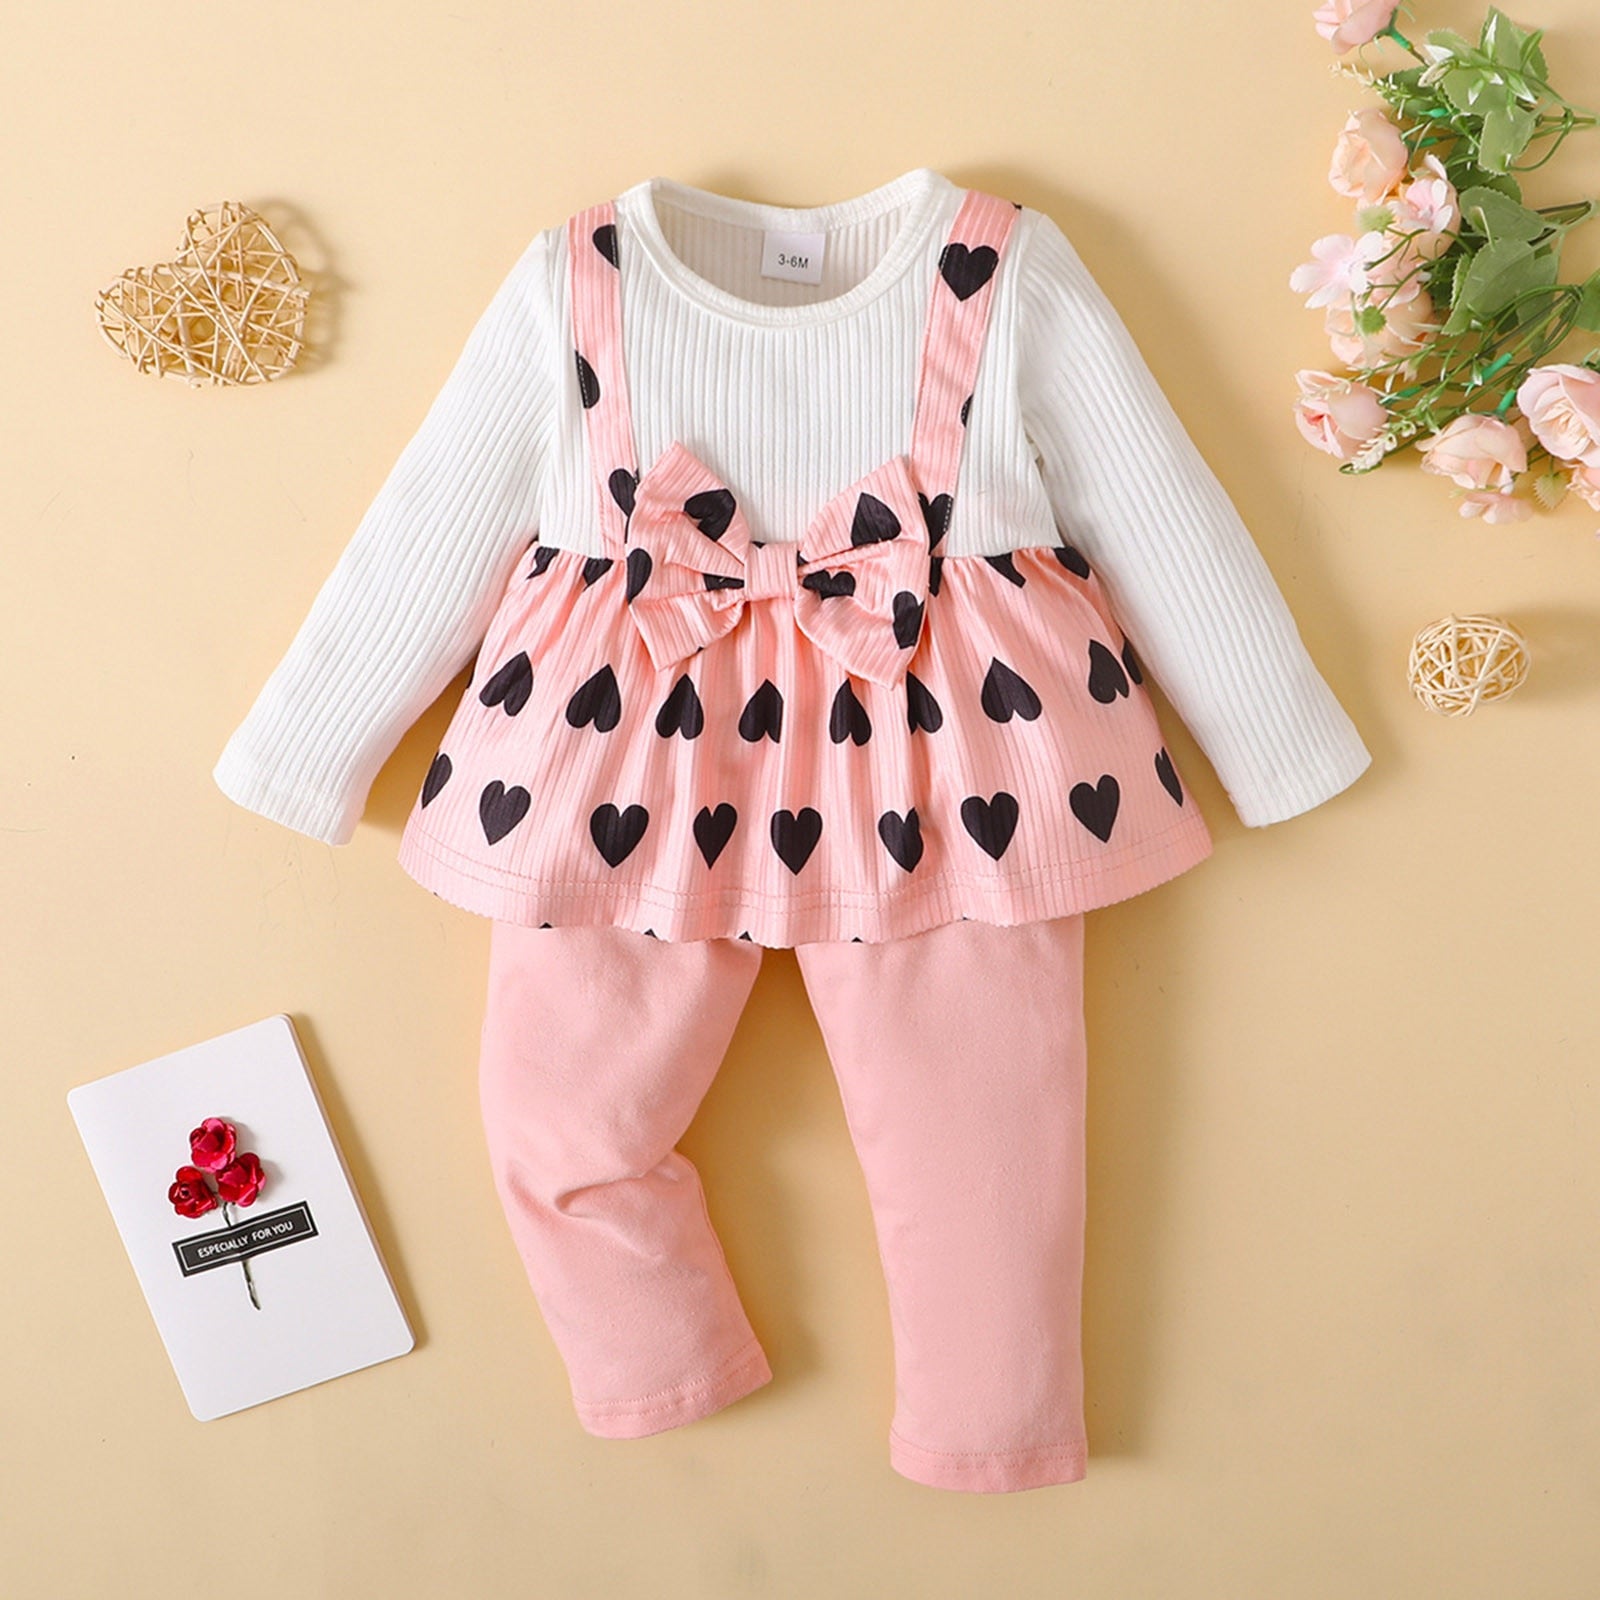 Adorable Valentine’s Day Clothes Sets for Baby Girls - Heart Print Dress and Solid Pants Outfits